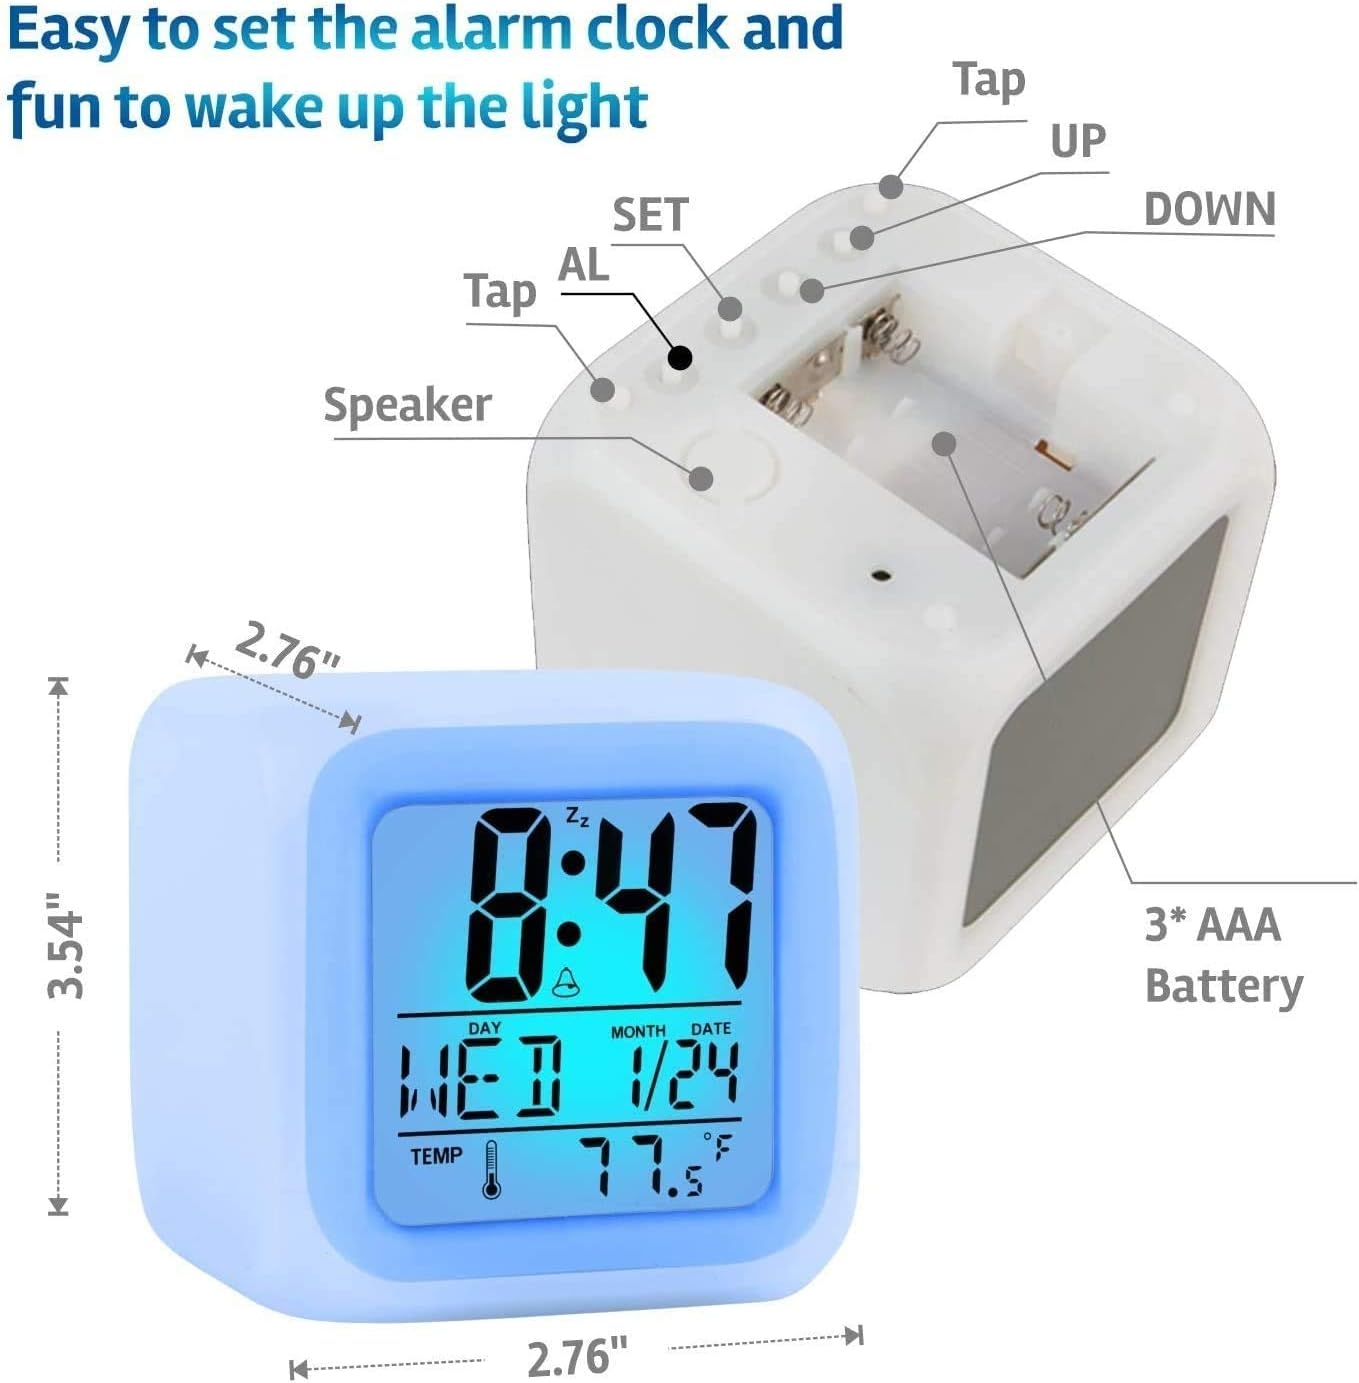 Alarm Clock Kids Wake Up Easy Setting Digital Travel for Boys Girls, Large Display Time/Date/Alarm with Snooze, Bedside Clock Handheld Sized, LED Night Light Clock - Best Gift for Kids